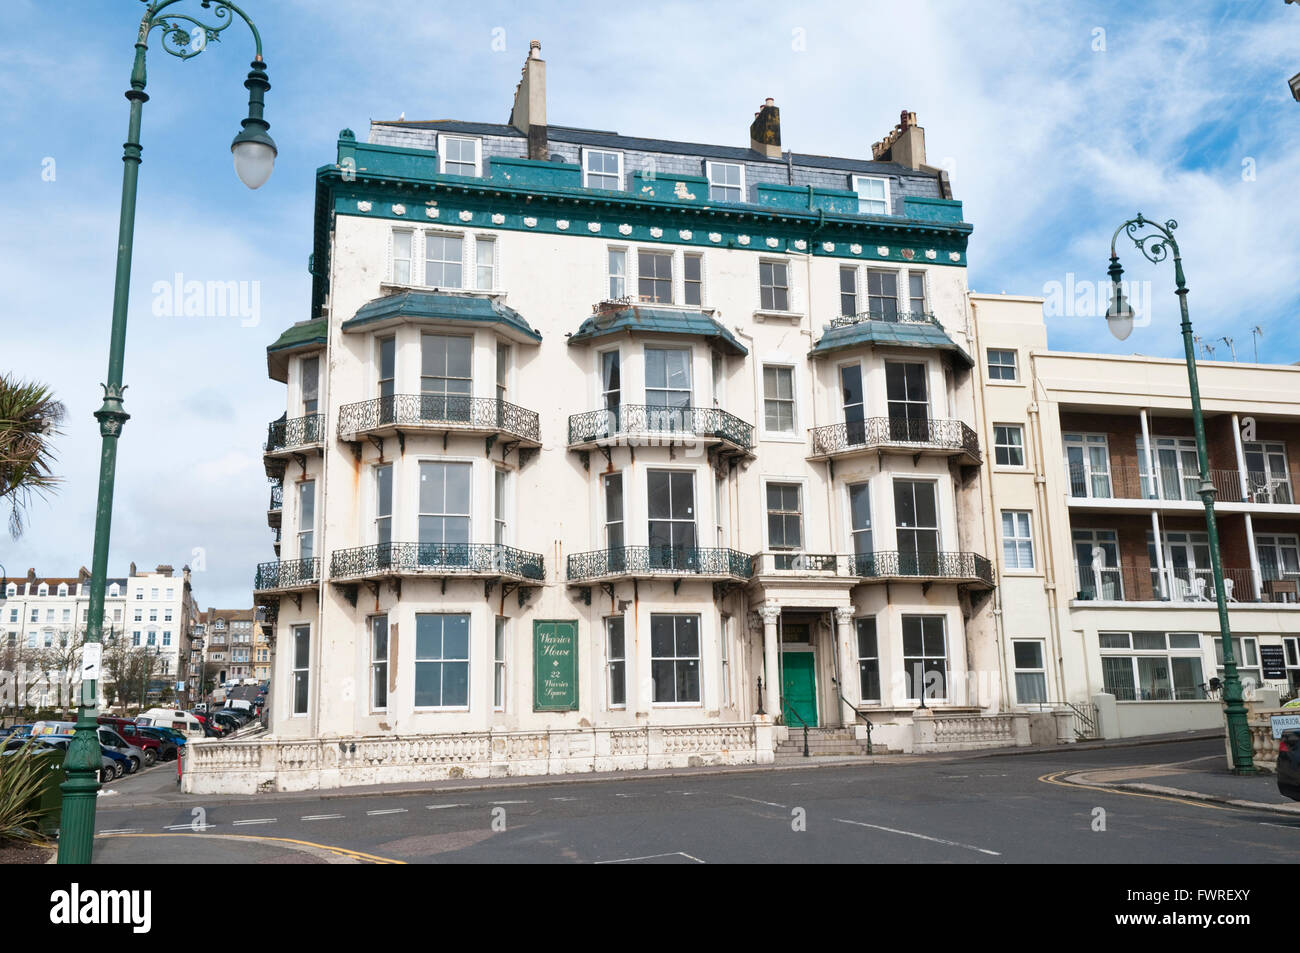 An elegant but run-down Victorian building on the edge of Warrior Square in St Leonards, East Sussex, UK Stock Photo